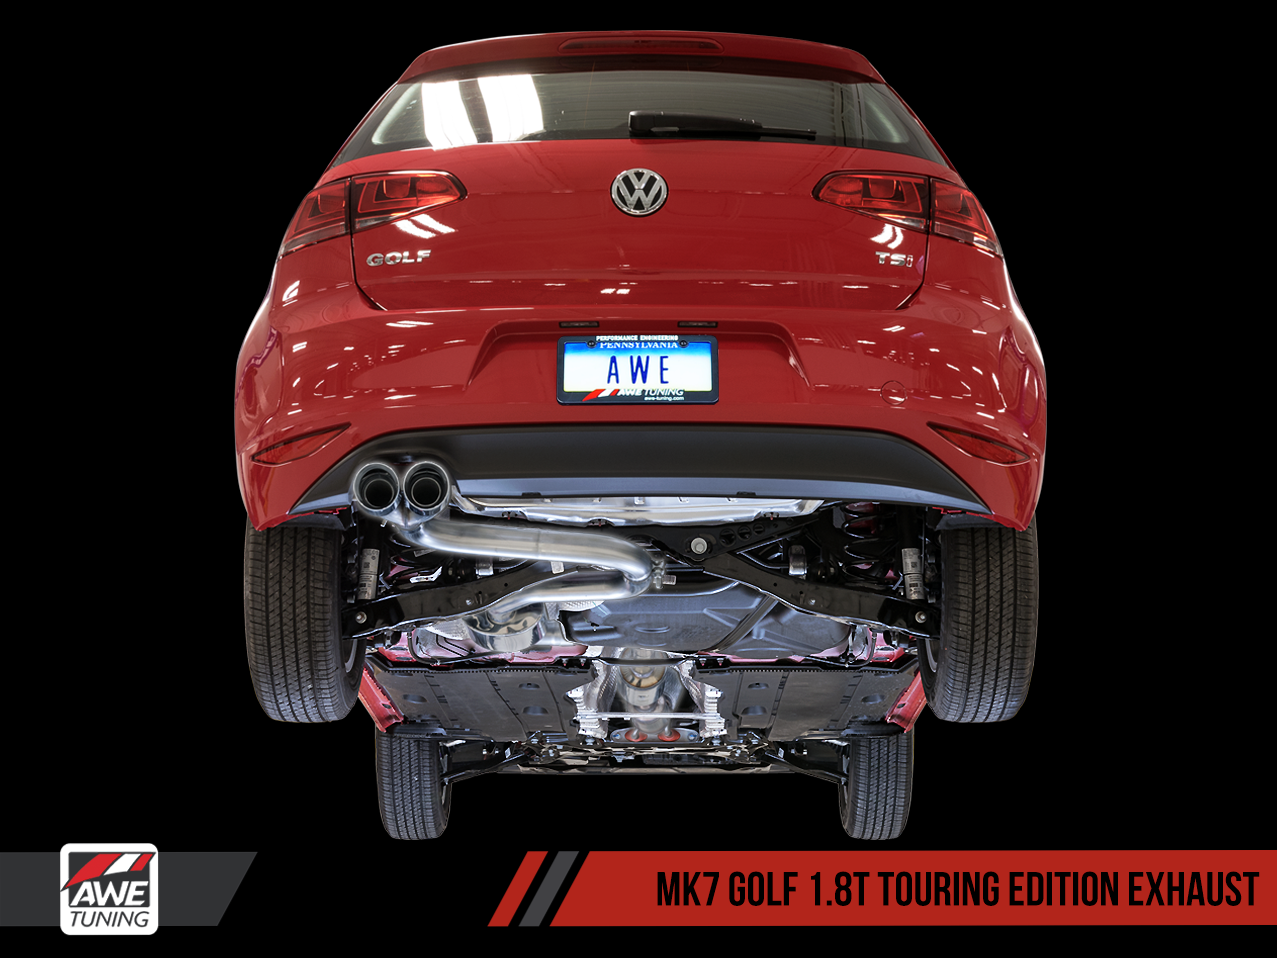 Touring Edition Exhaust for VW MK7 Golf 1.8T - Diamond Black Tips (90mm)